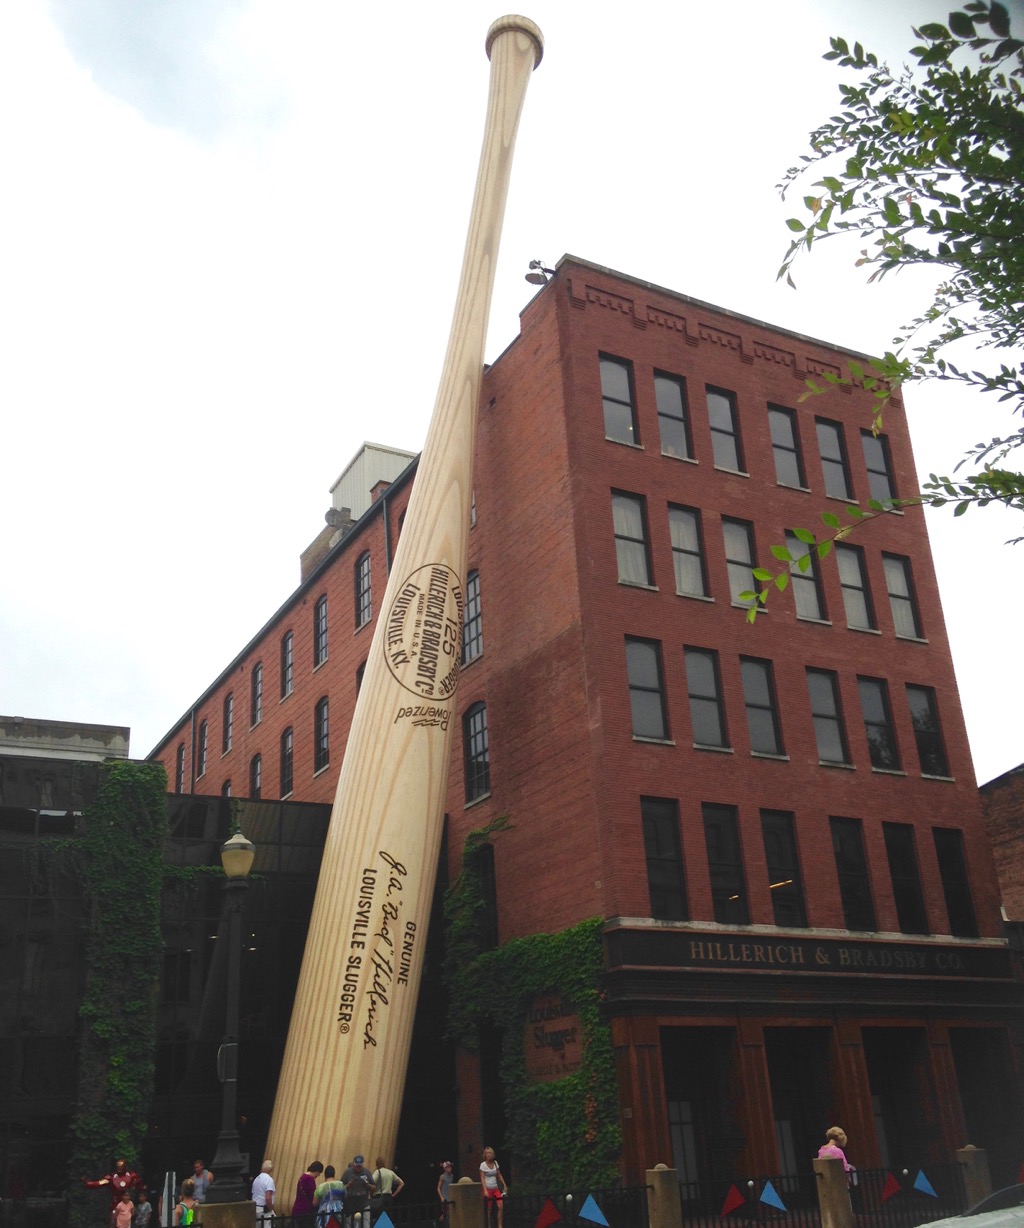 Louisville Slugger Factory and Museum